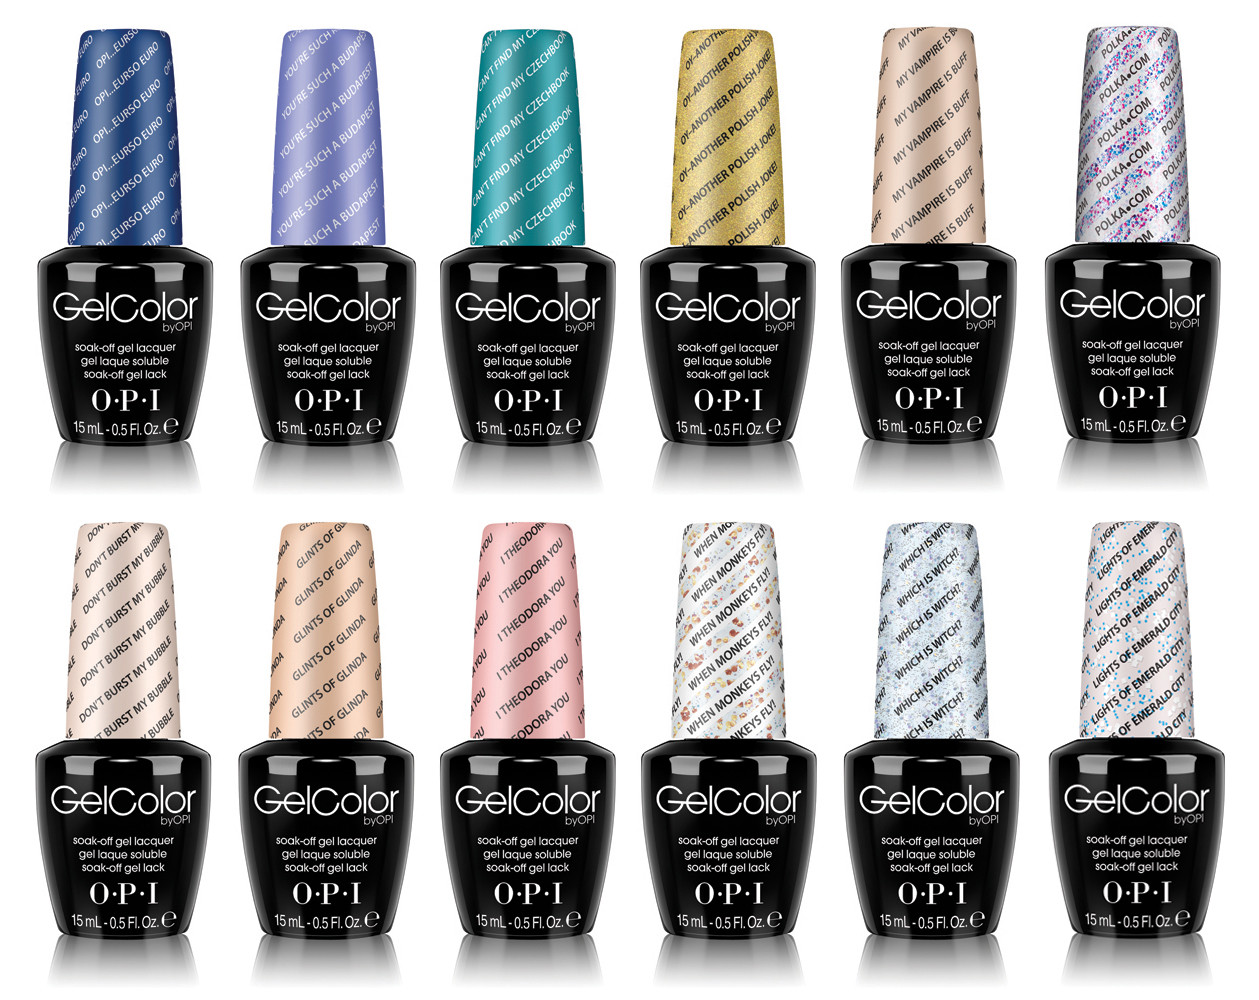 OPI GelColor - New Shellac Colors - wide 2